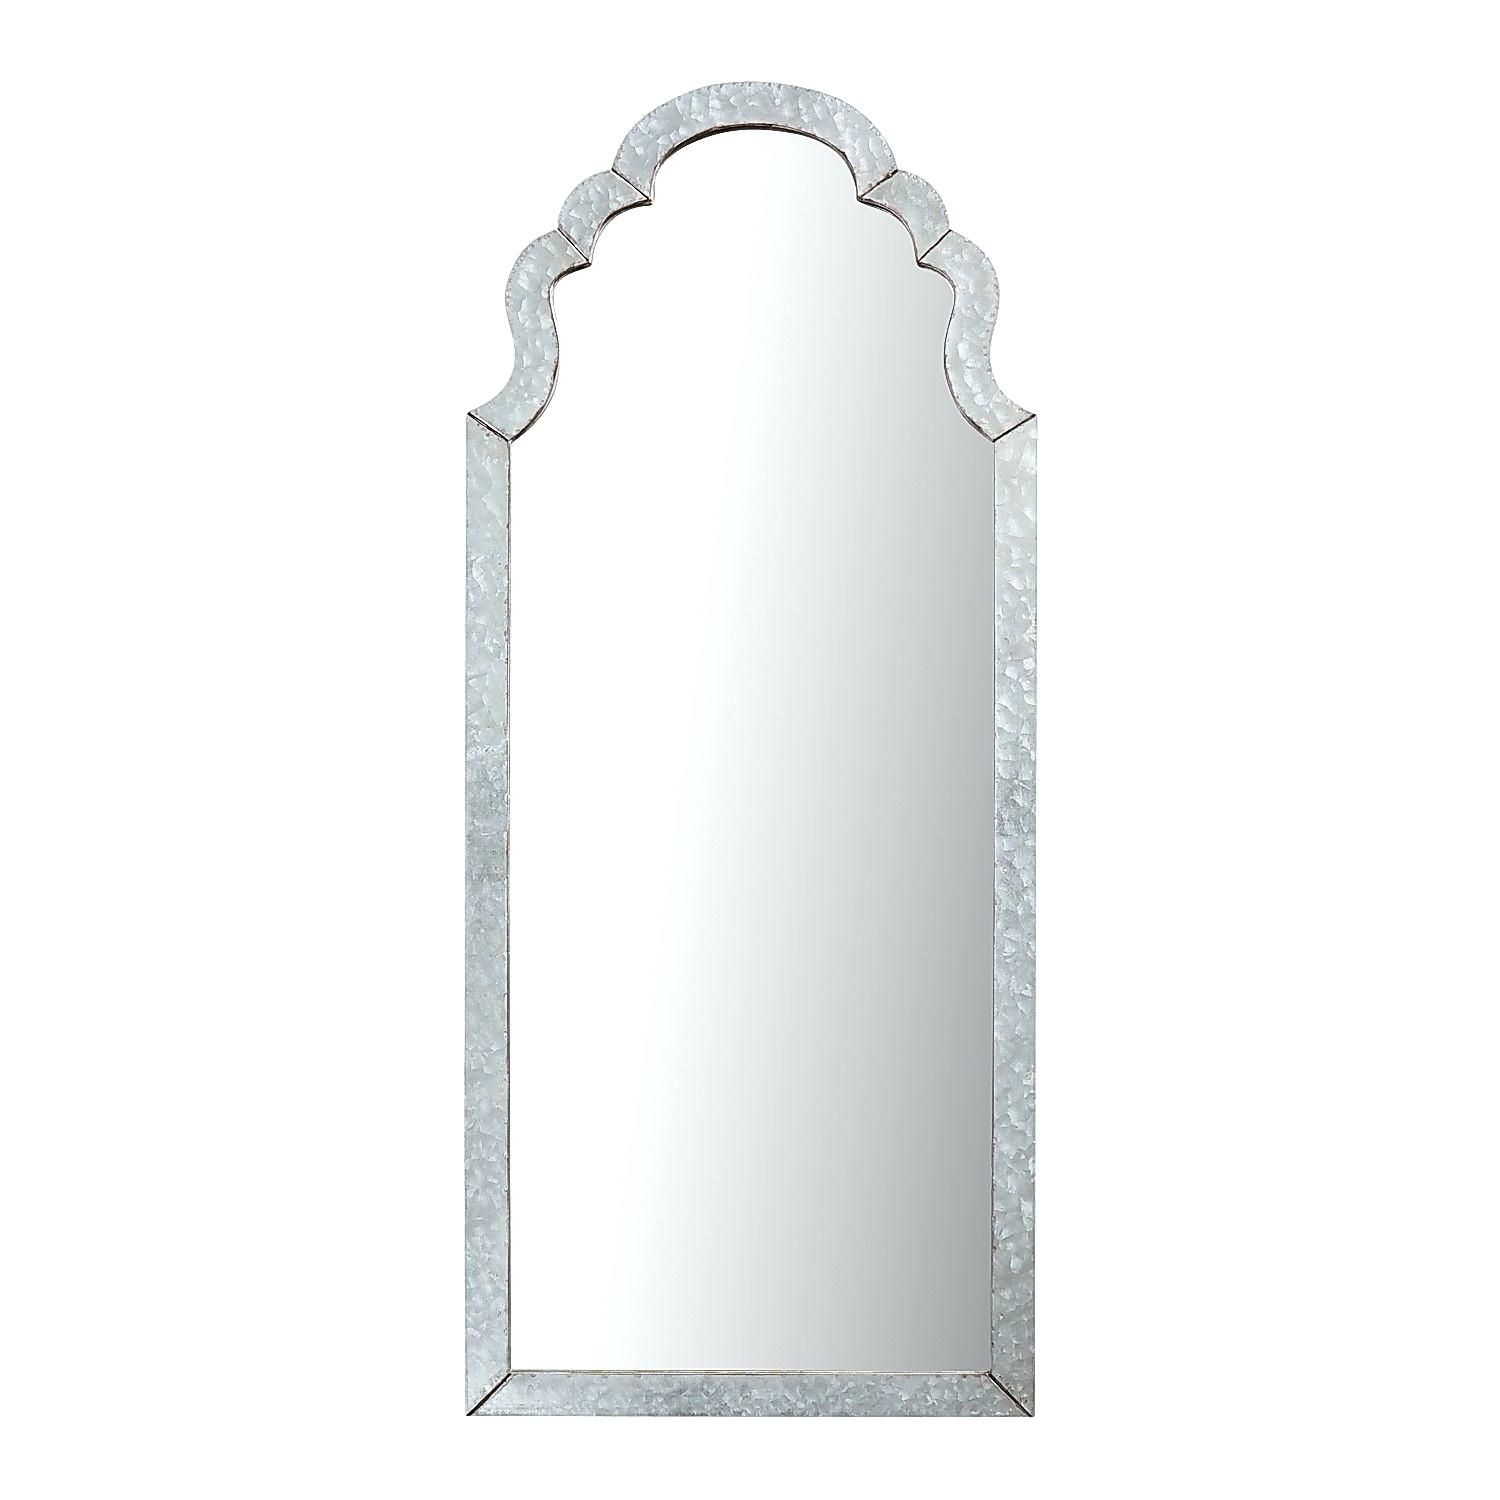 Galvanized Metal Mirror Rope Hanging Wall Accent Mirrors Intended For Round Galvanized Metallic Wall Mirrors (Photo 26 of 30)